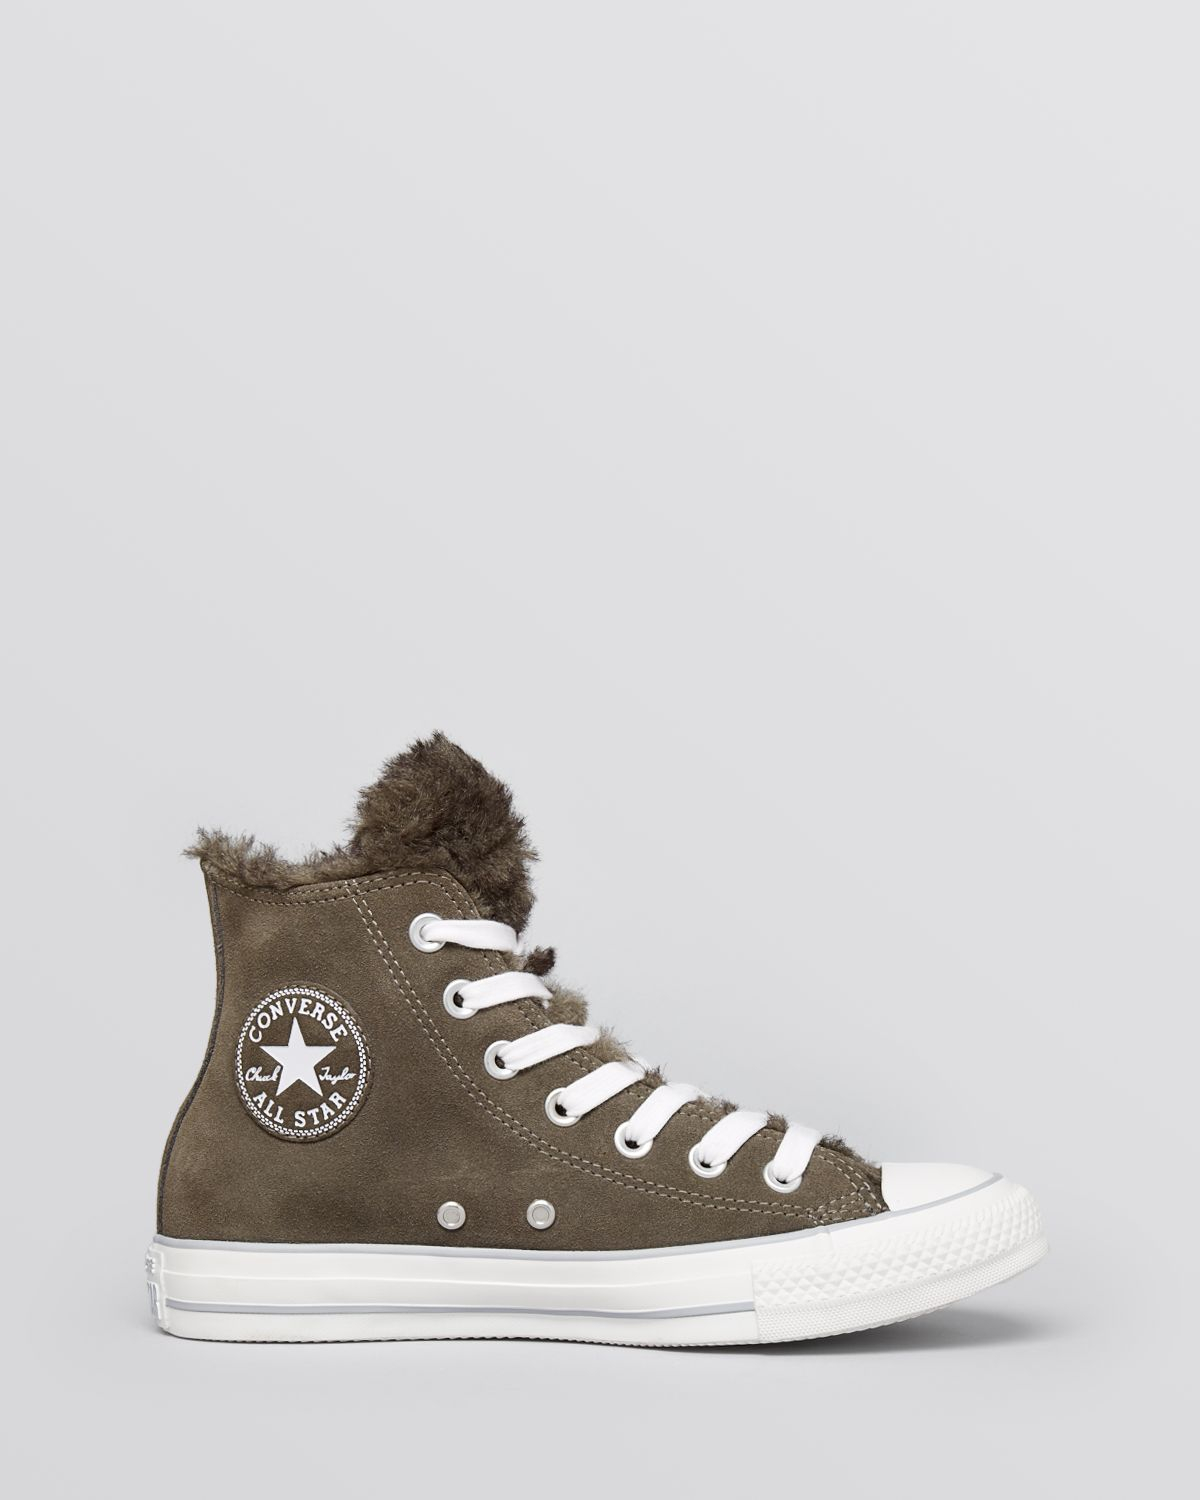 Shop - shearling lined converse - OFF 